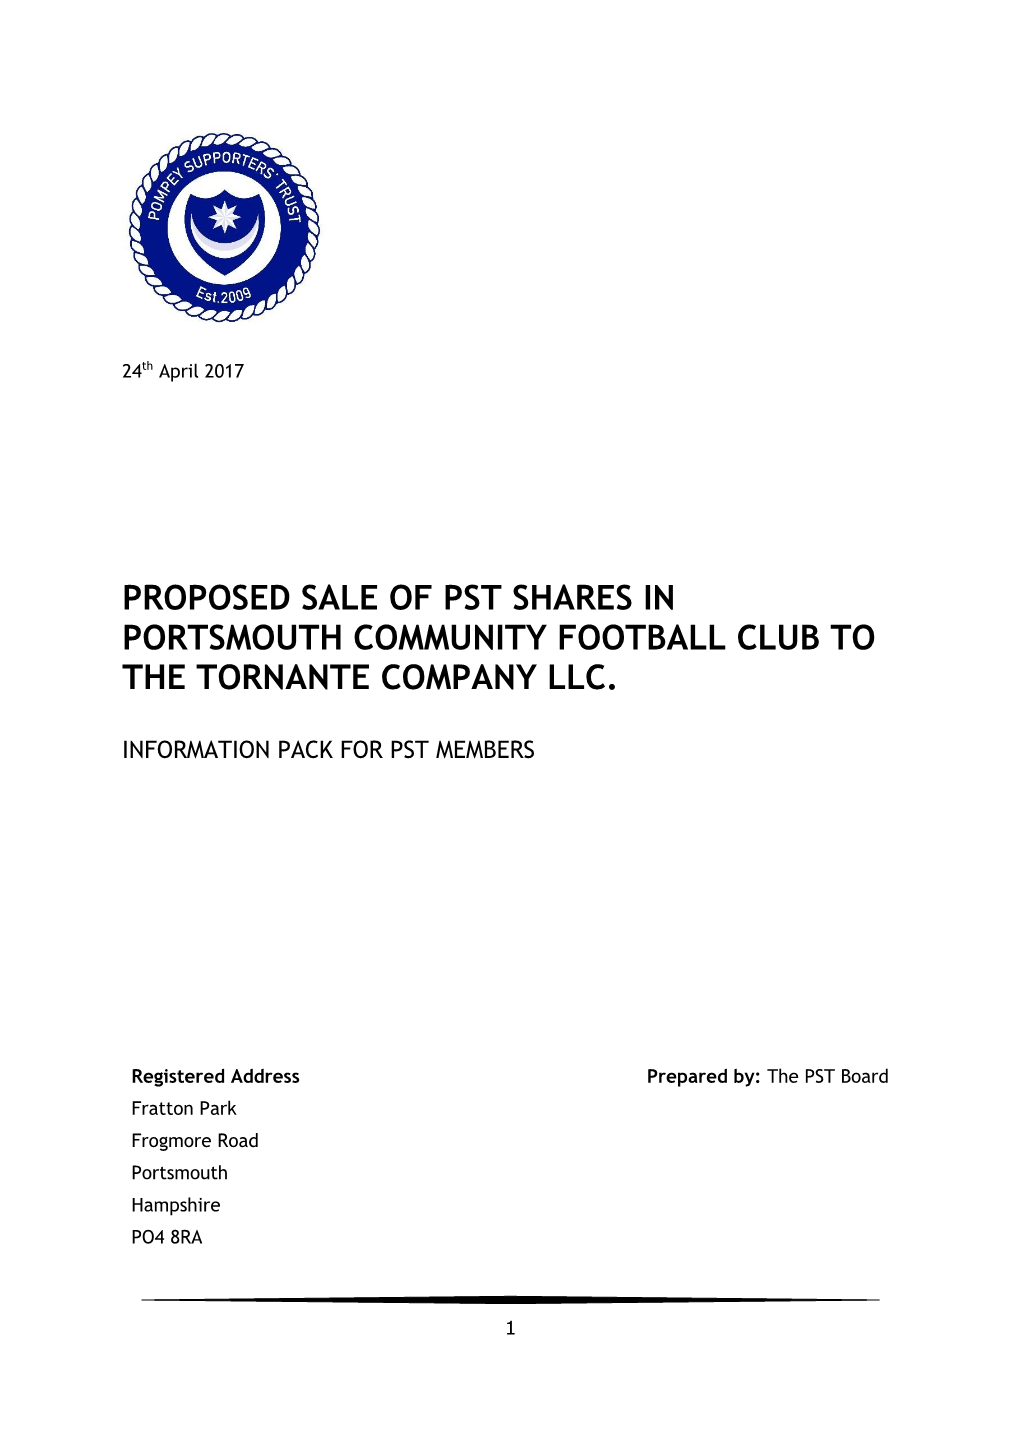 Proposed Sale of Pst Shares in Portsmouth Community Football Club to the Tornante Company Llc